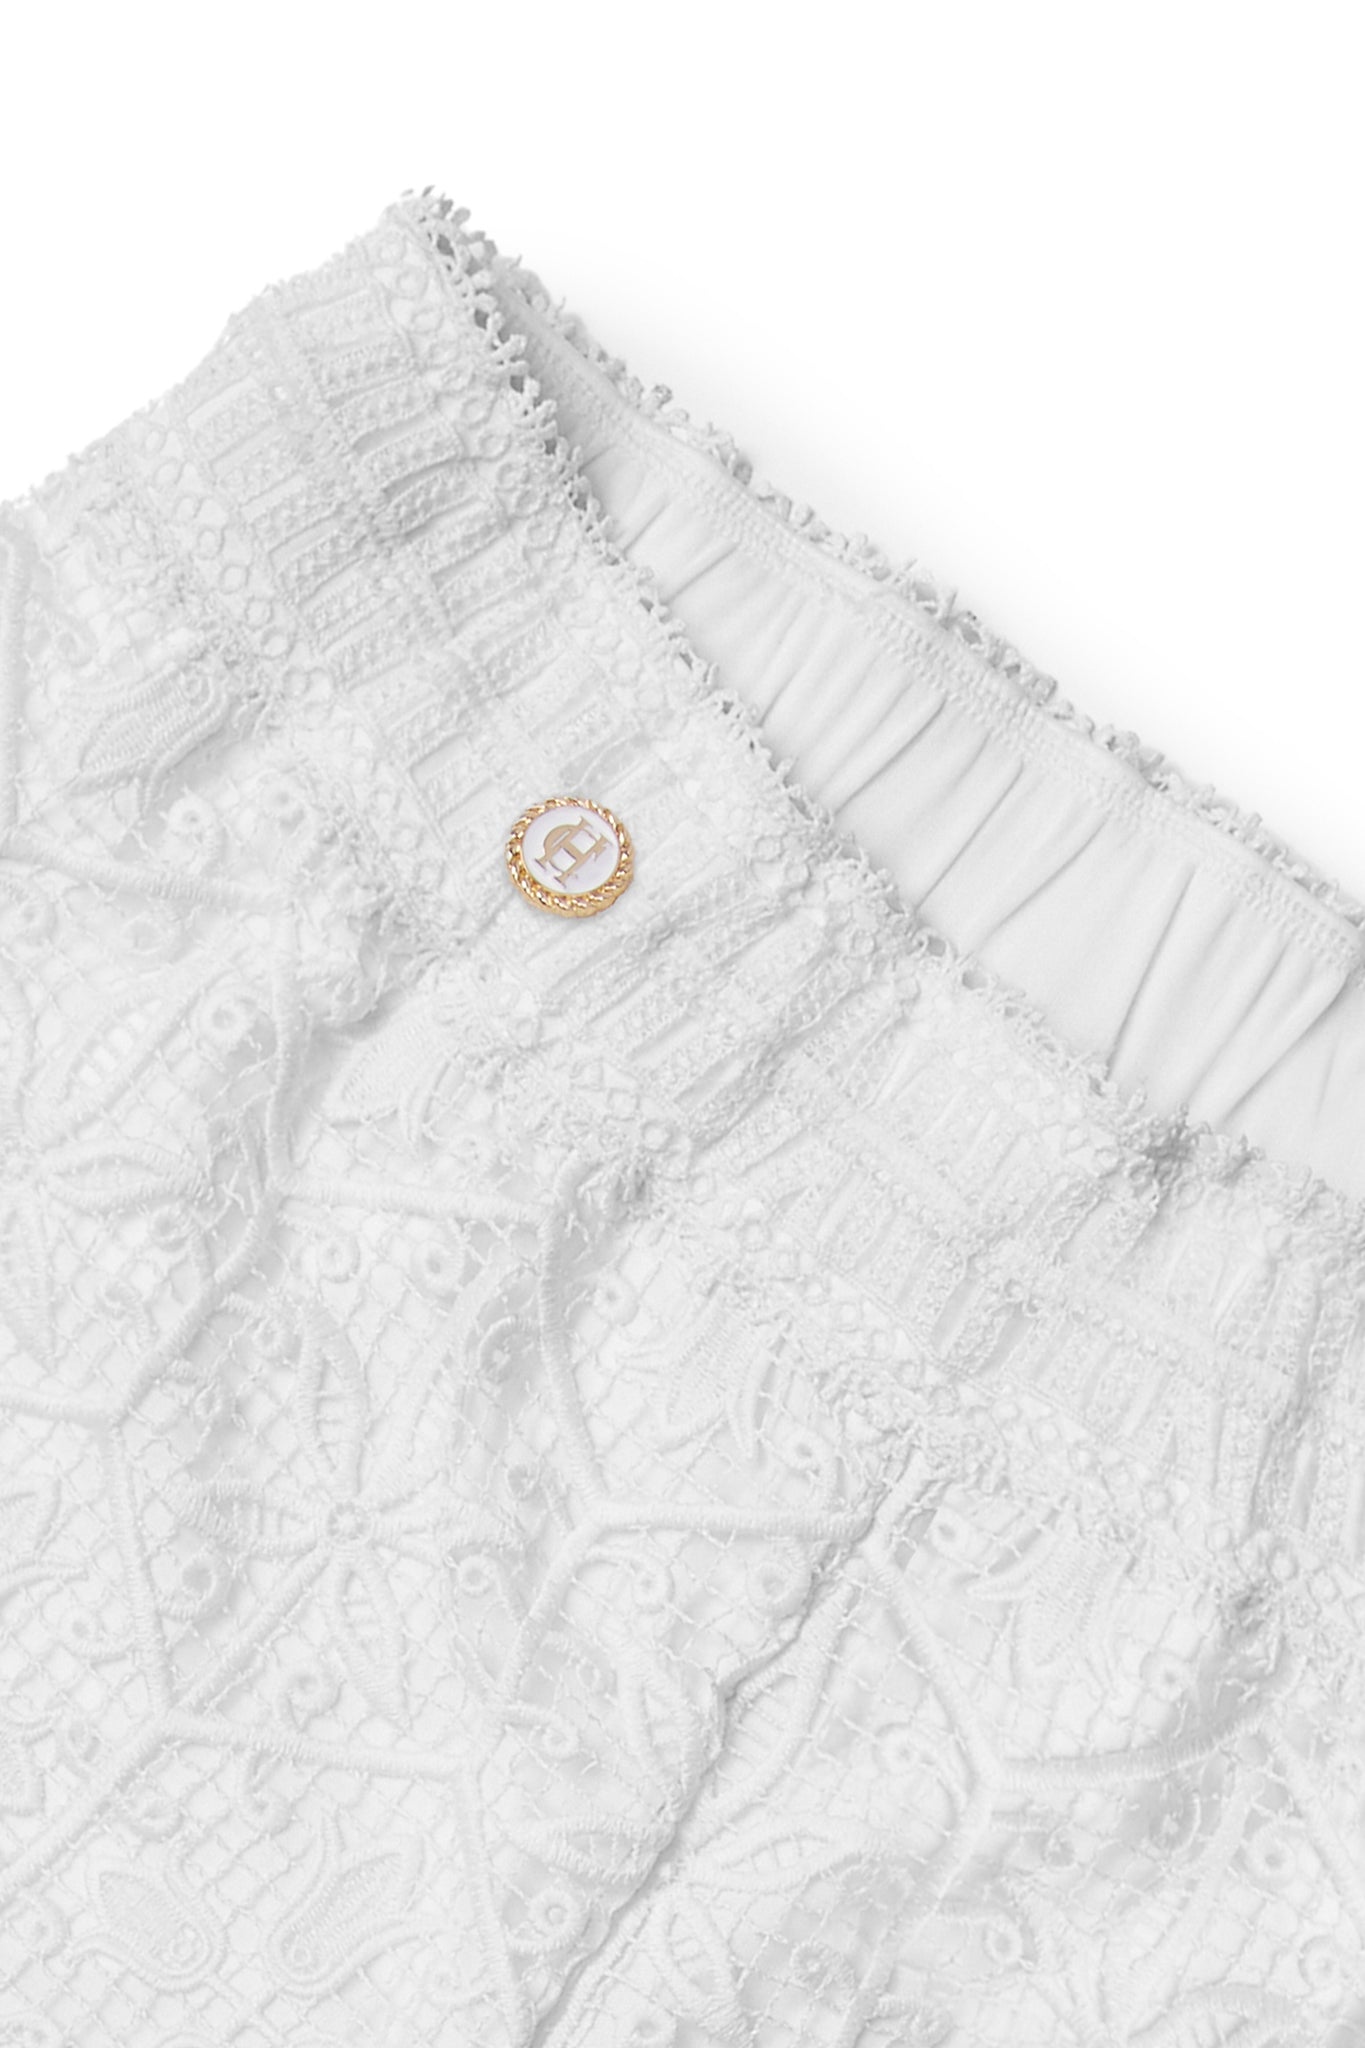 gold and white enamel button detail on womens white floral lace beach short with white opaque underlay and an elasticated waist